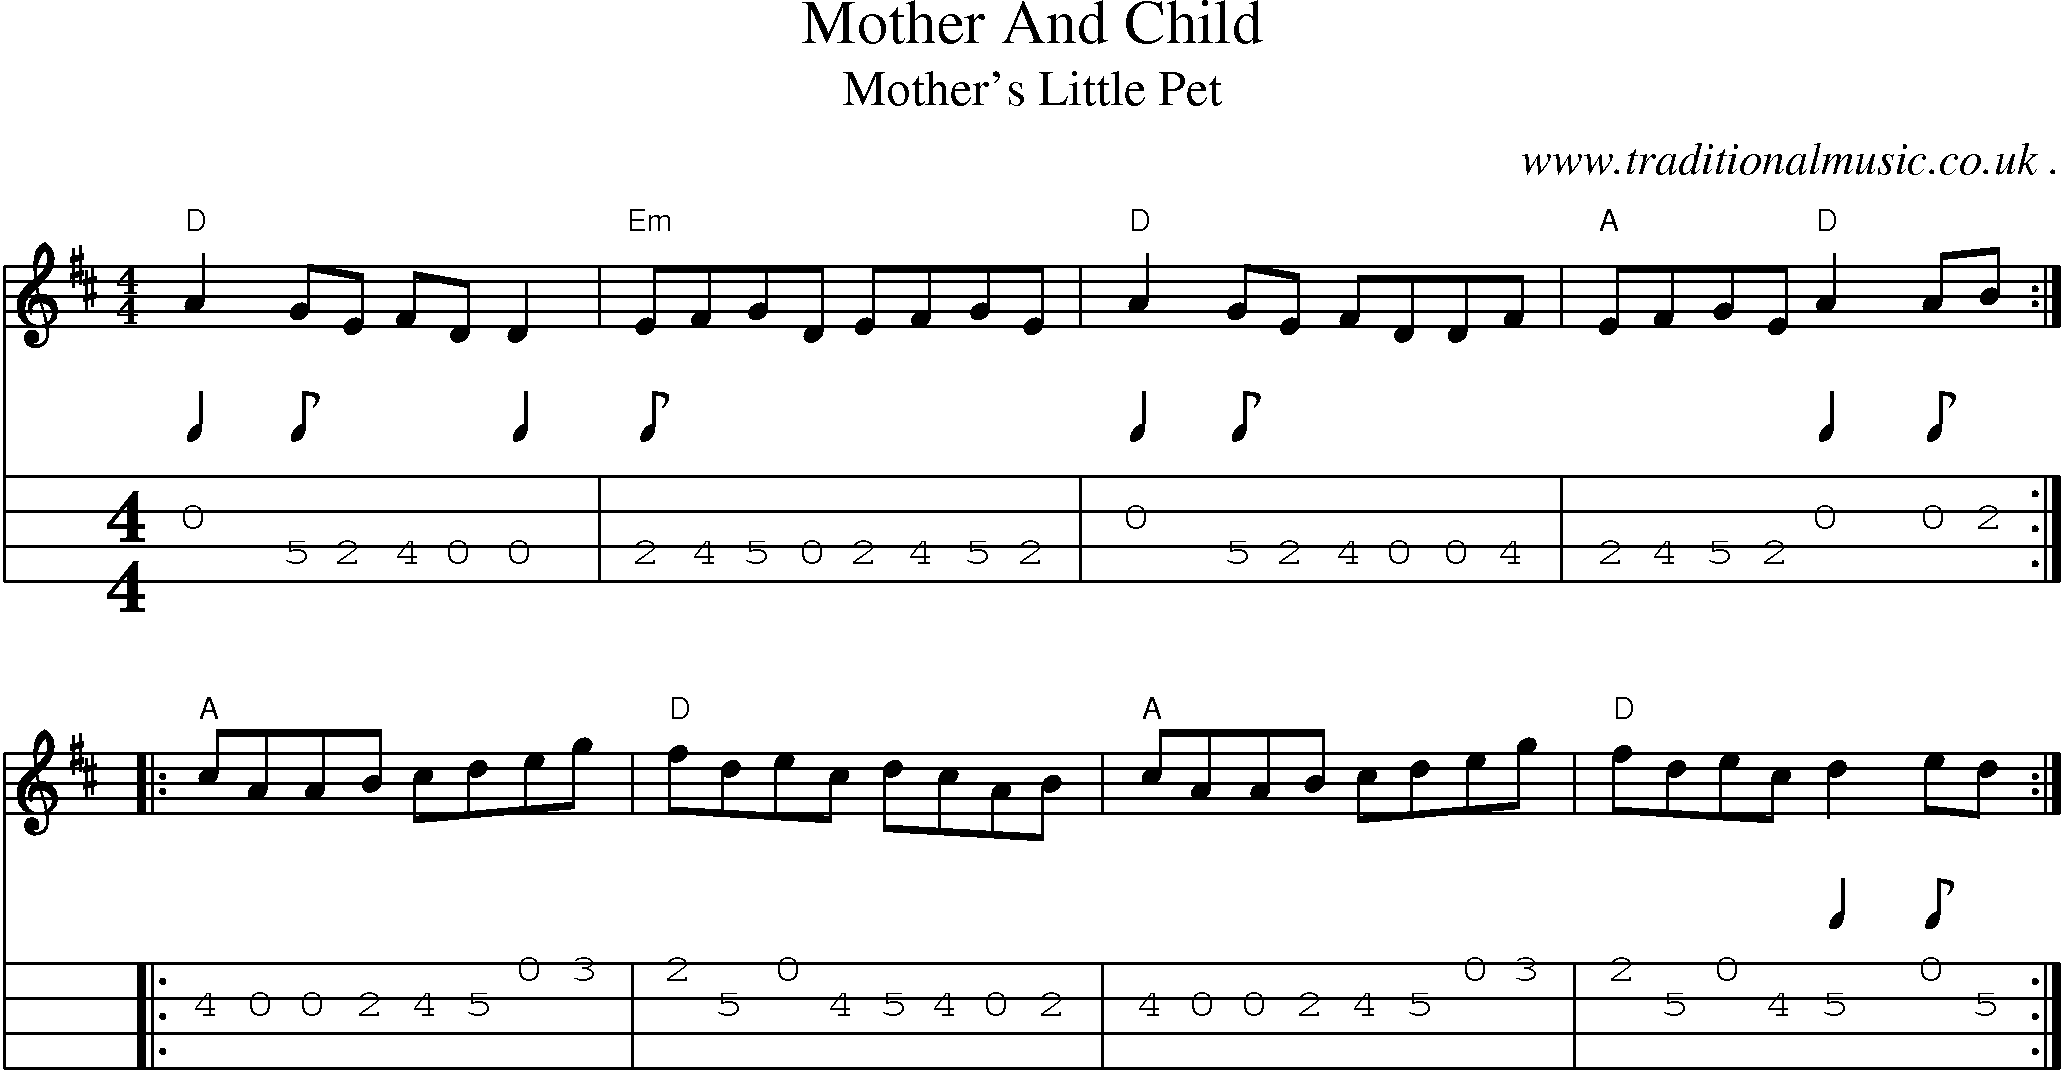 Music Score and Guitar Tabs for Mother And Child